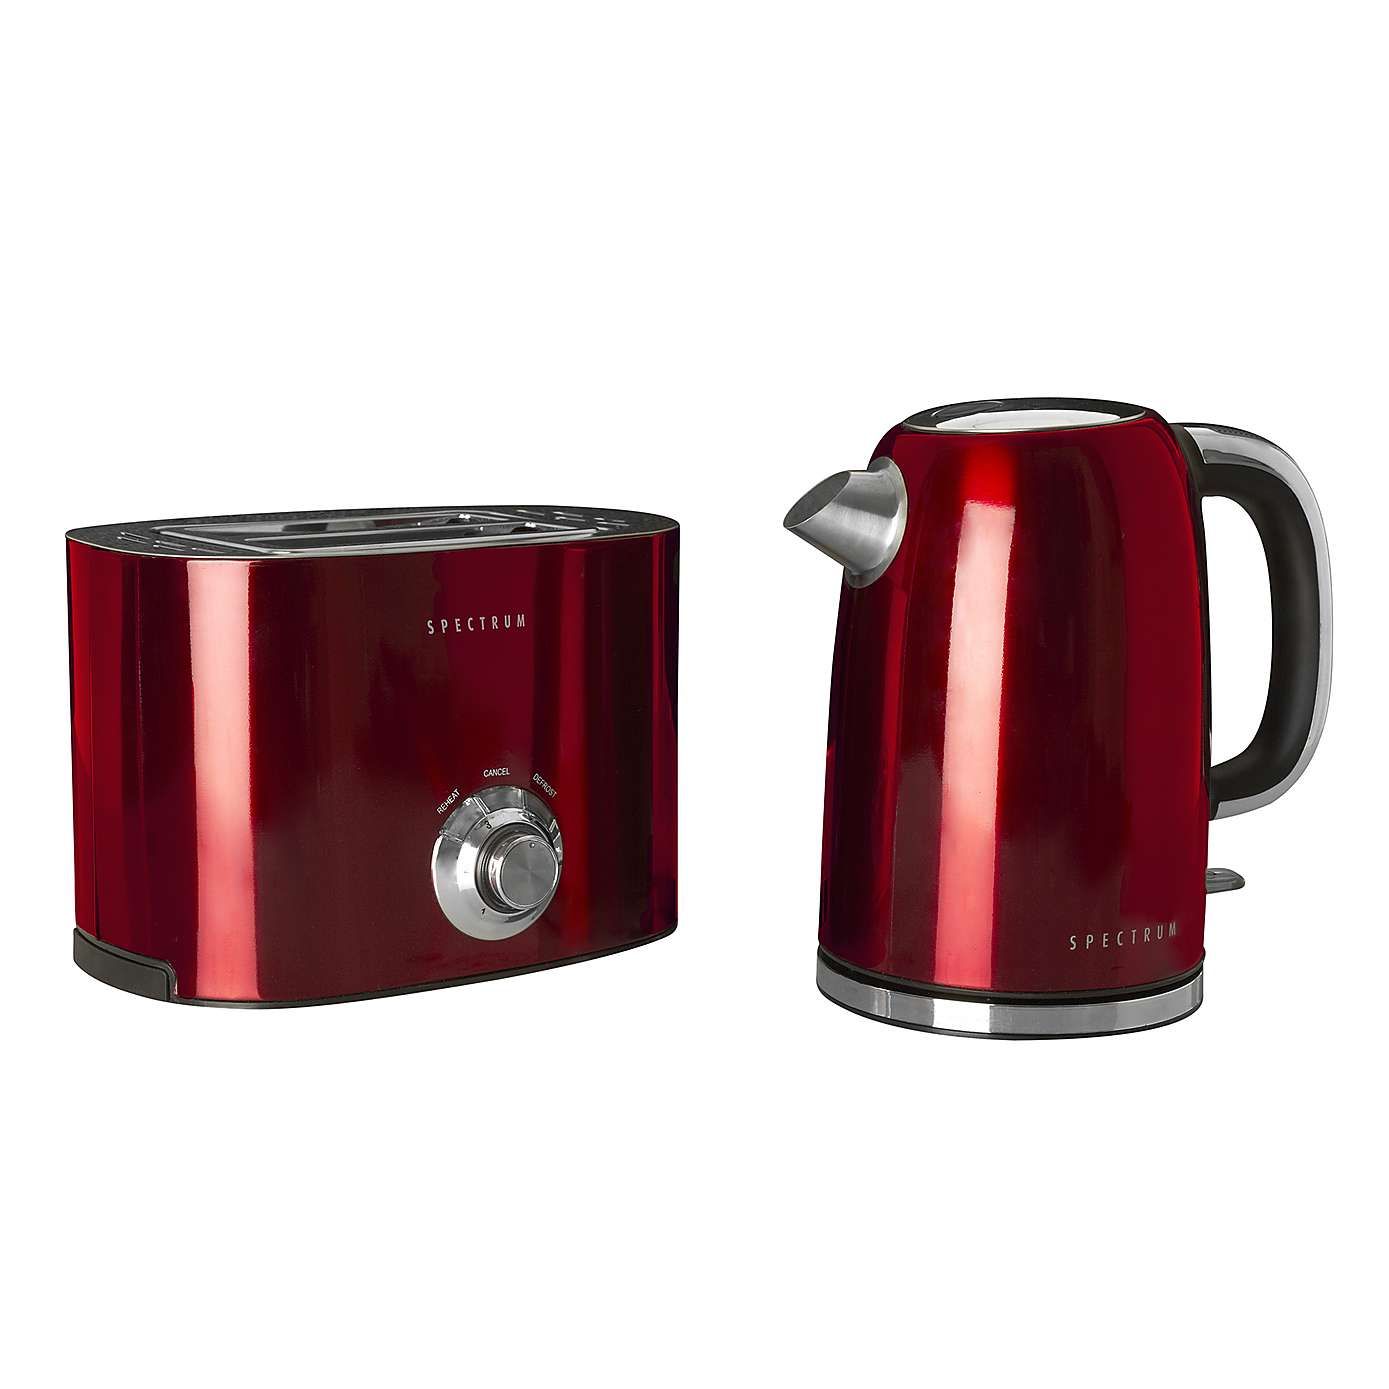 Red Spectrum Kettle and Toaster Set | Dunelm | New house - Kitchen ...